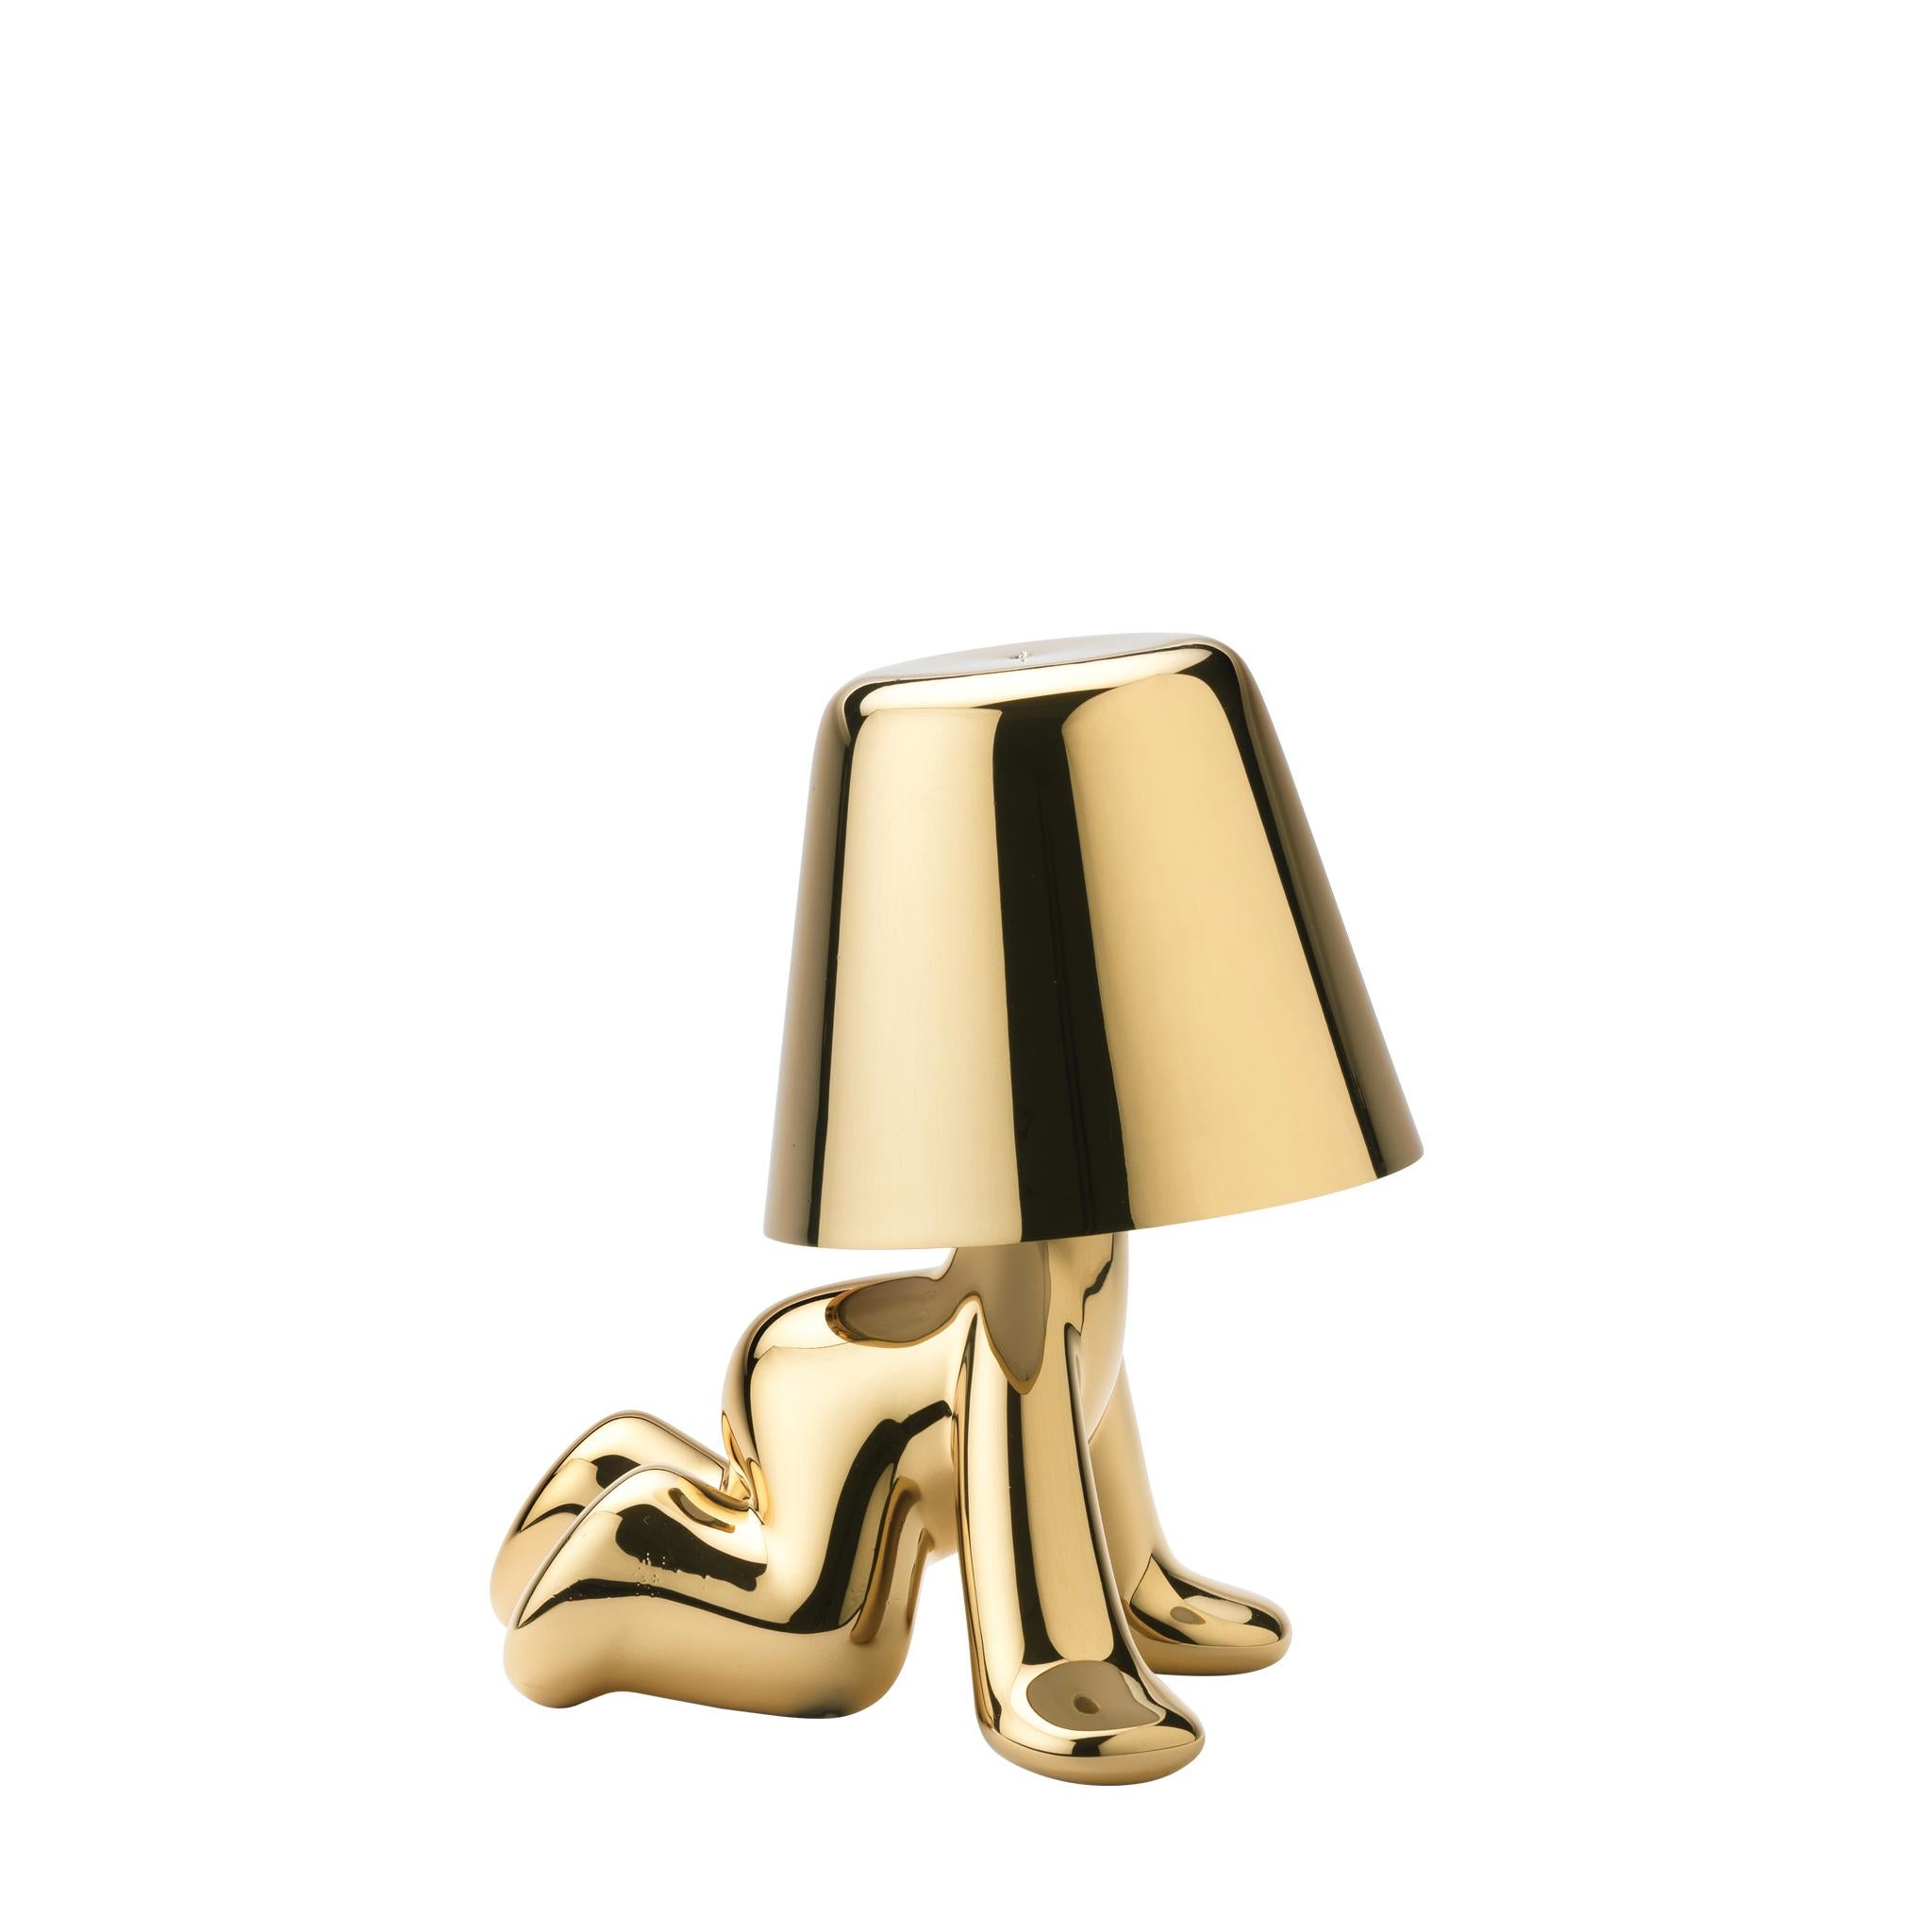 This Golden Brothers is called Ron.

Designed by Stefano Giovannoni, Golden Brothers is a family of lamp-characters which, reflecting a soft light on their body, enhance the plasticity and fluidity of the silhouette. The Golden Brothers, assuming